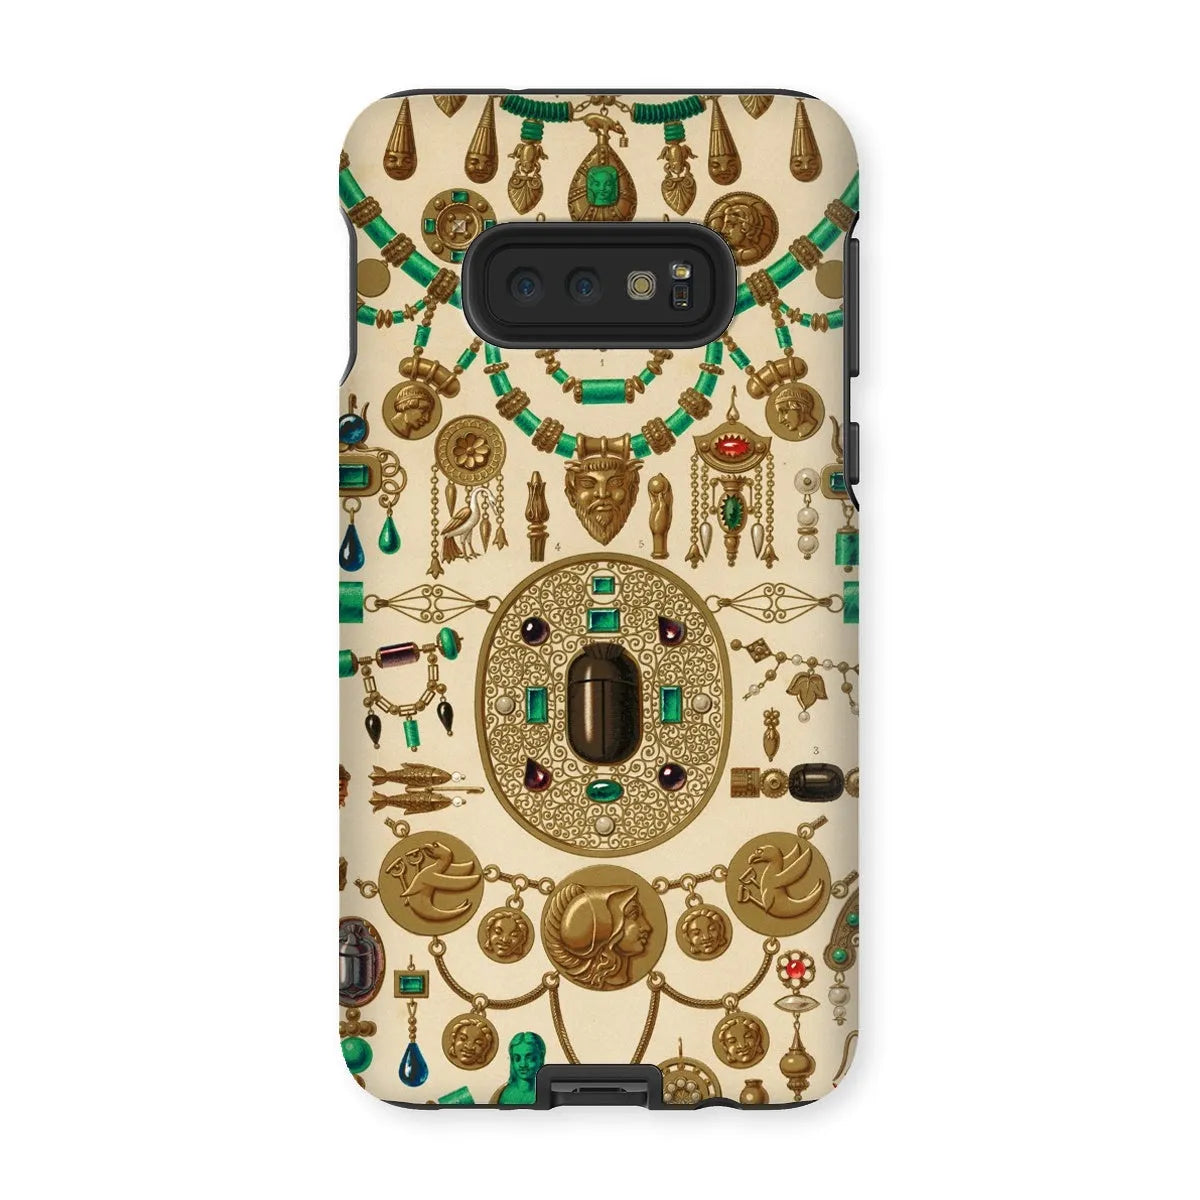 Etruscan Patterns From L’ornement Polychrome By Auguste Racinet Tough Phone Case - Samsung Galaxy S10e / Matte